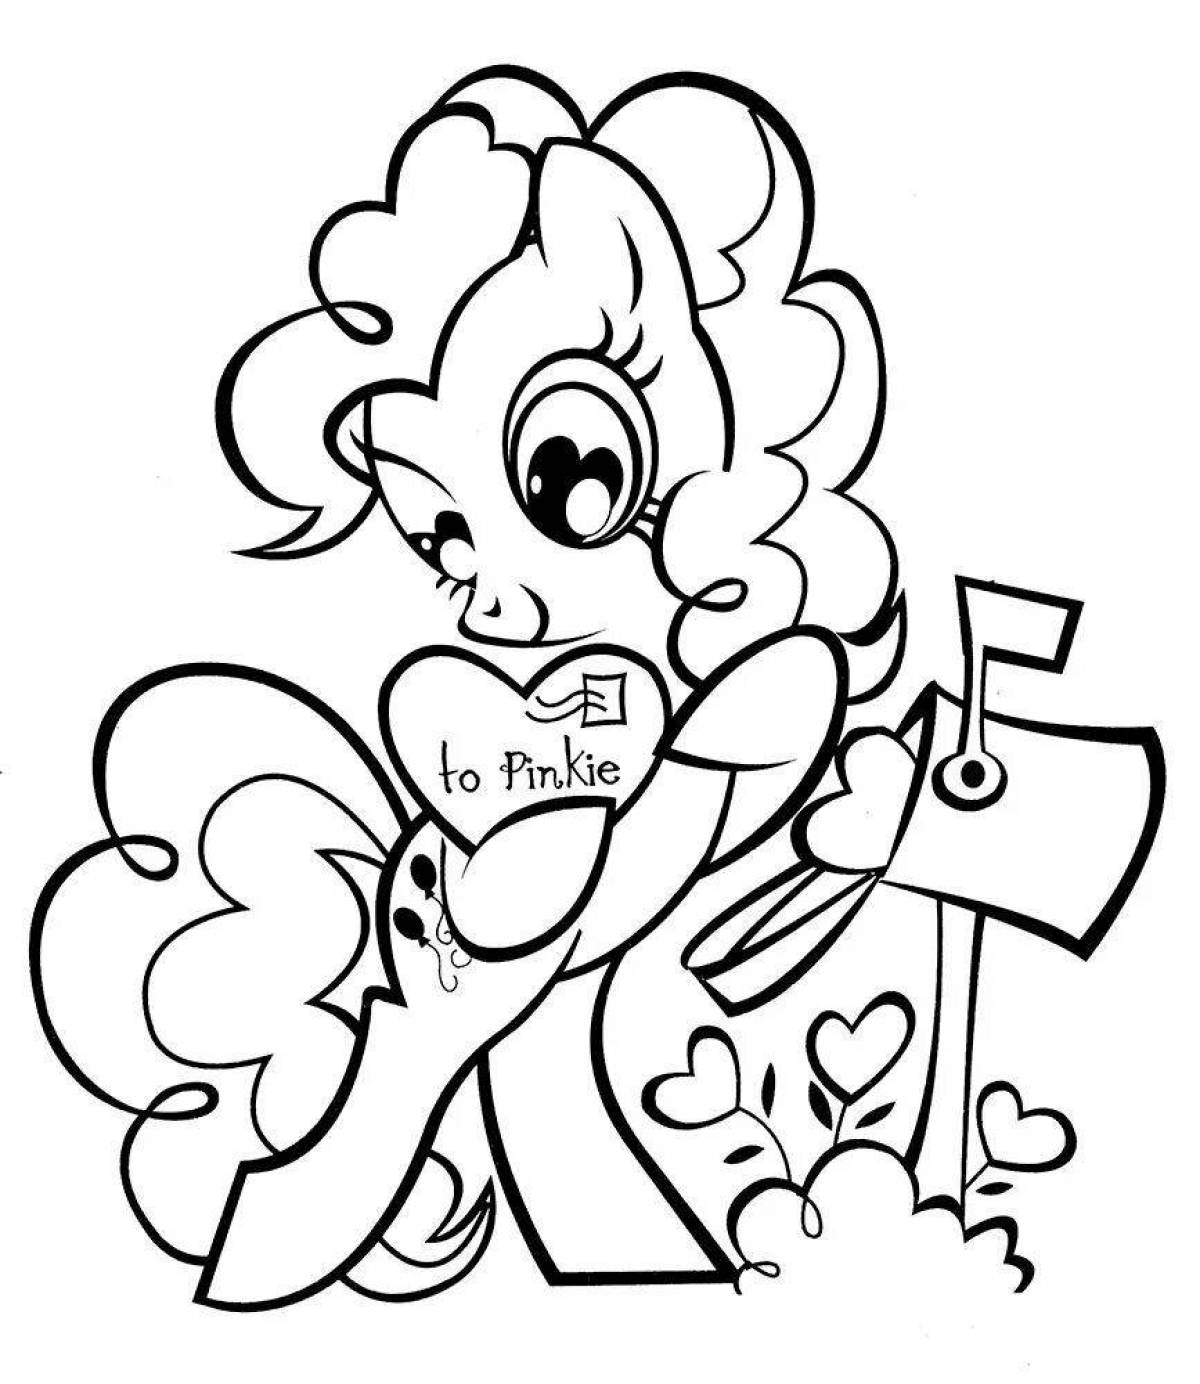 My little pony pinkie pie coloring book